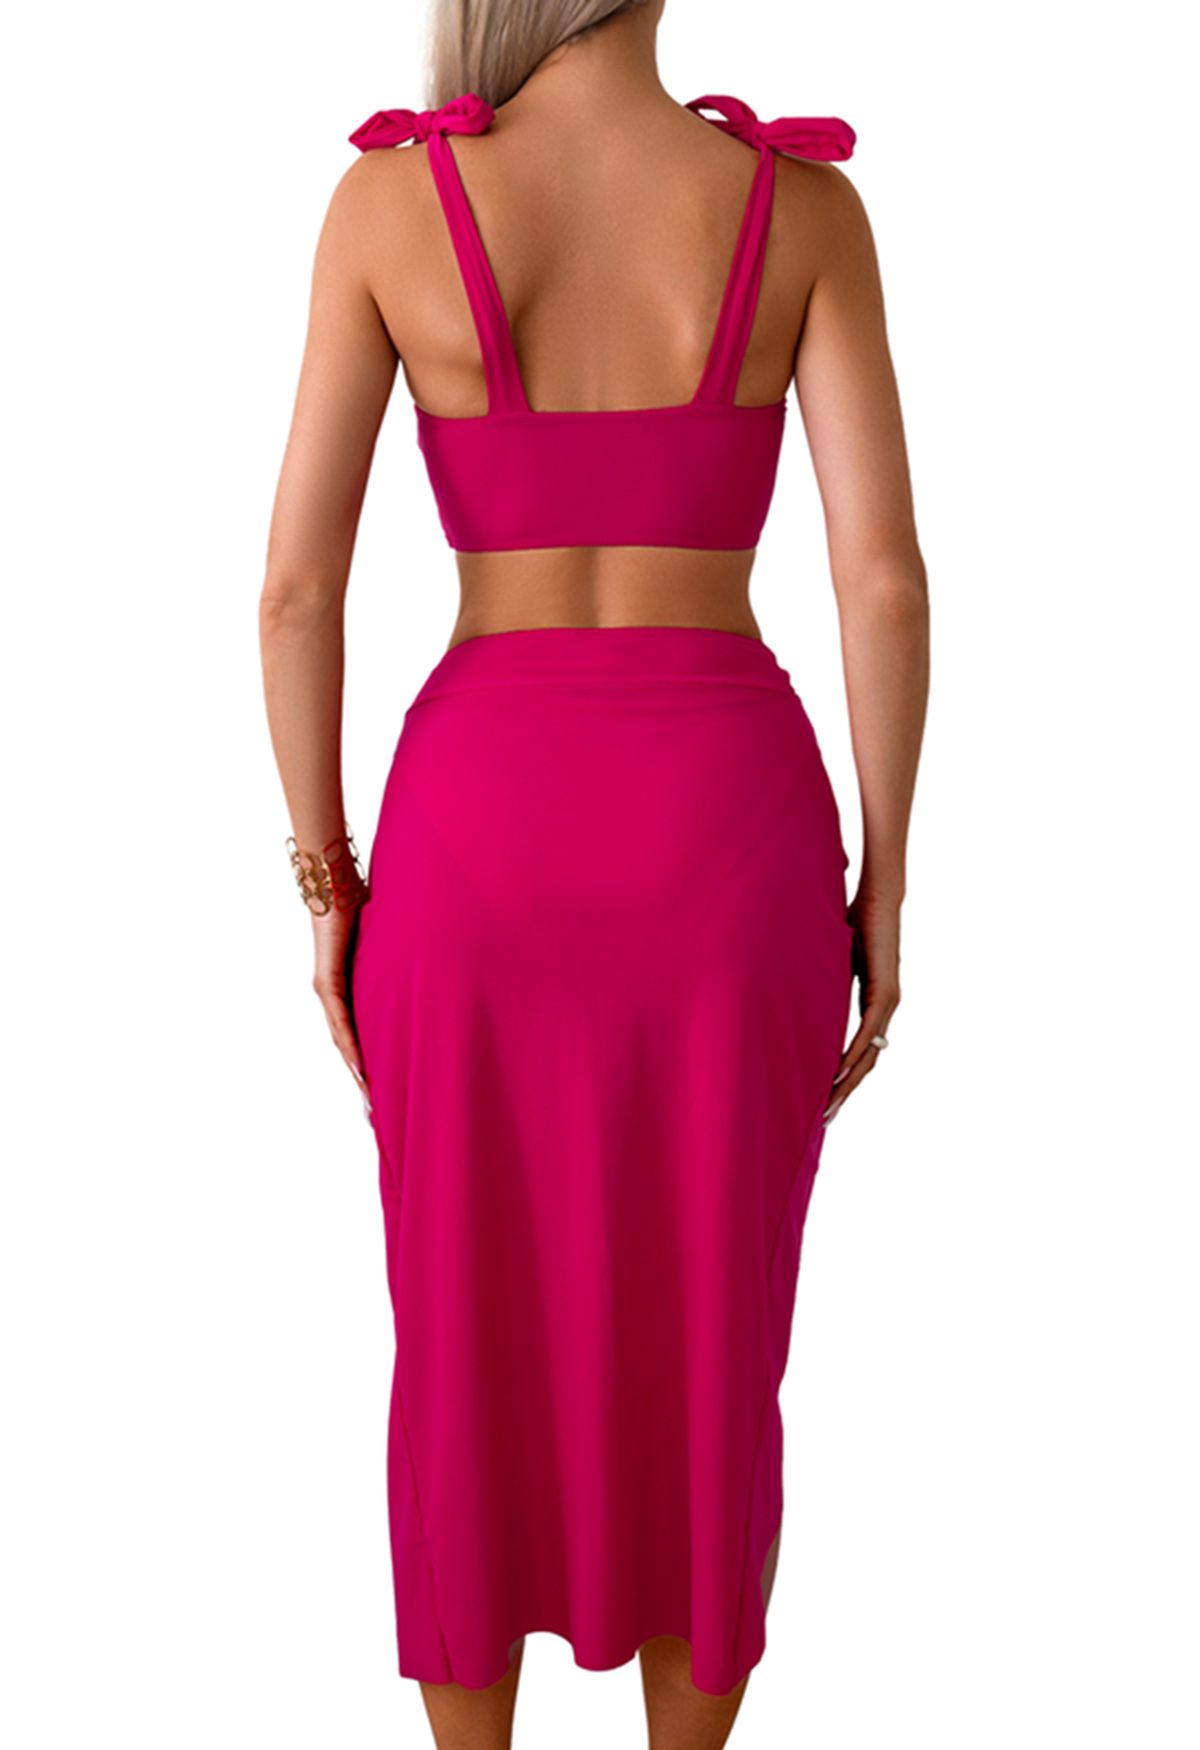 Ruched Asymmetric Wrap Cover-Up Skirt in Hot Pink